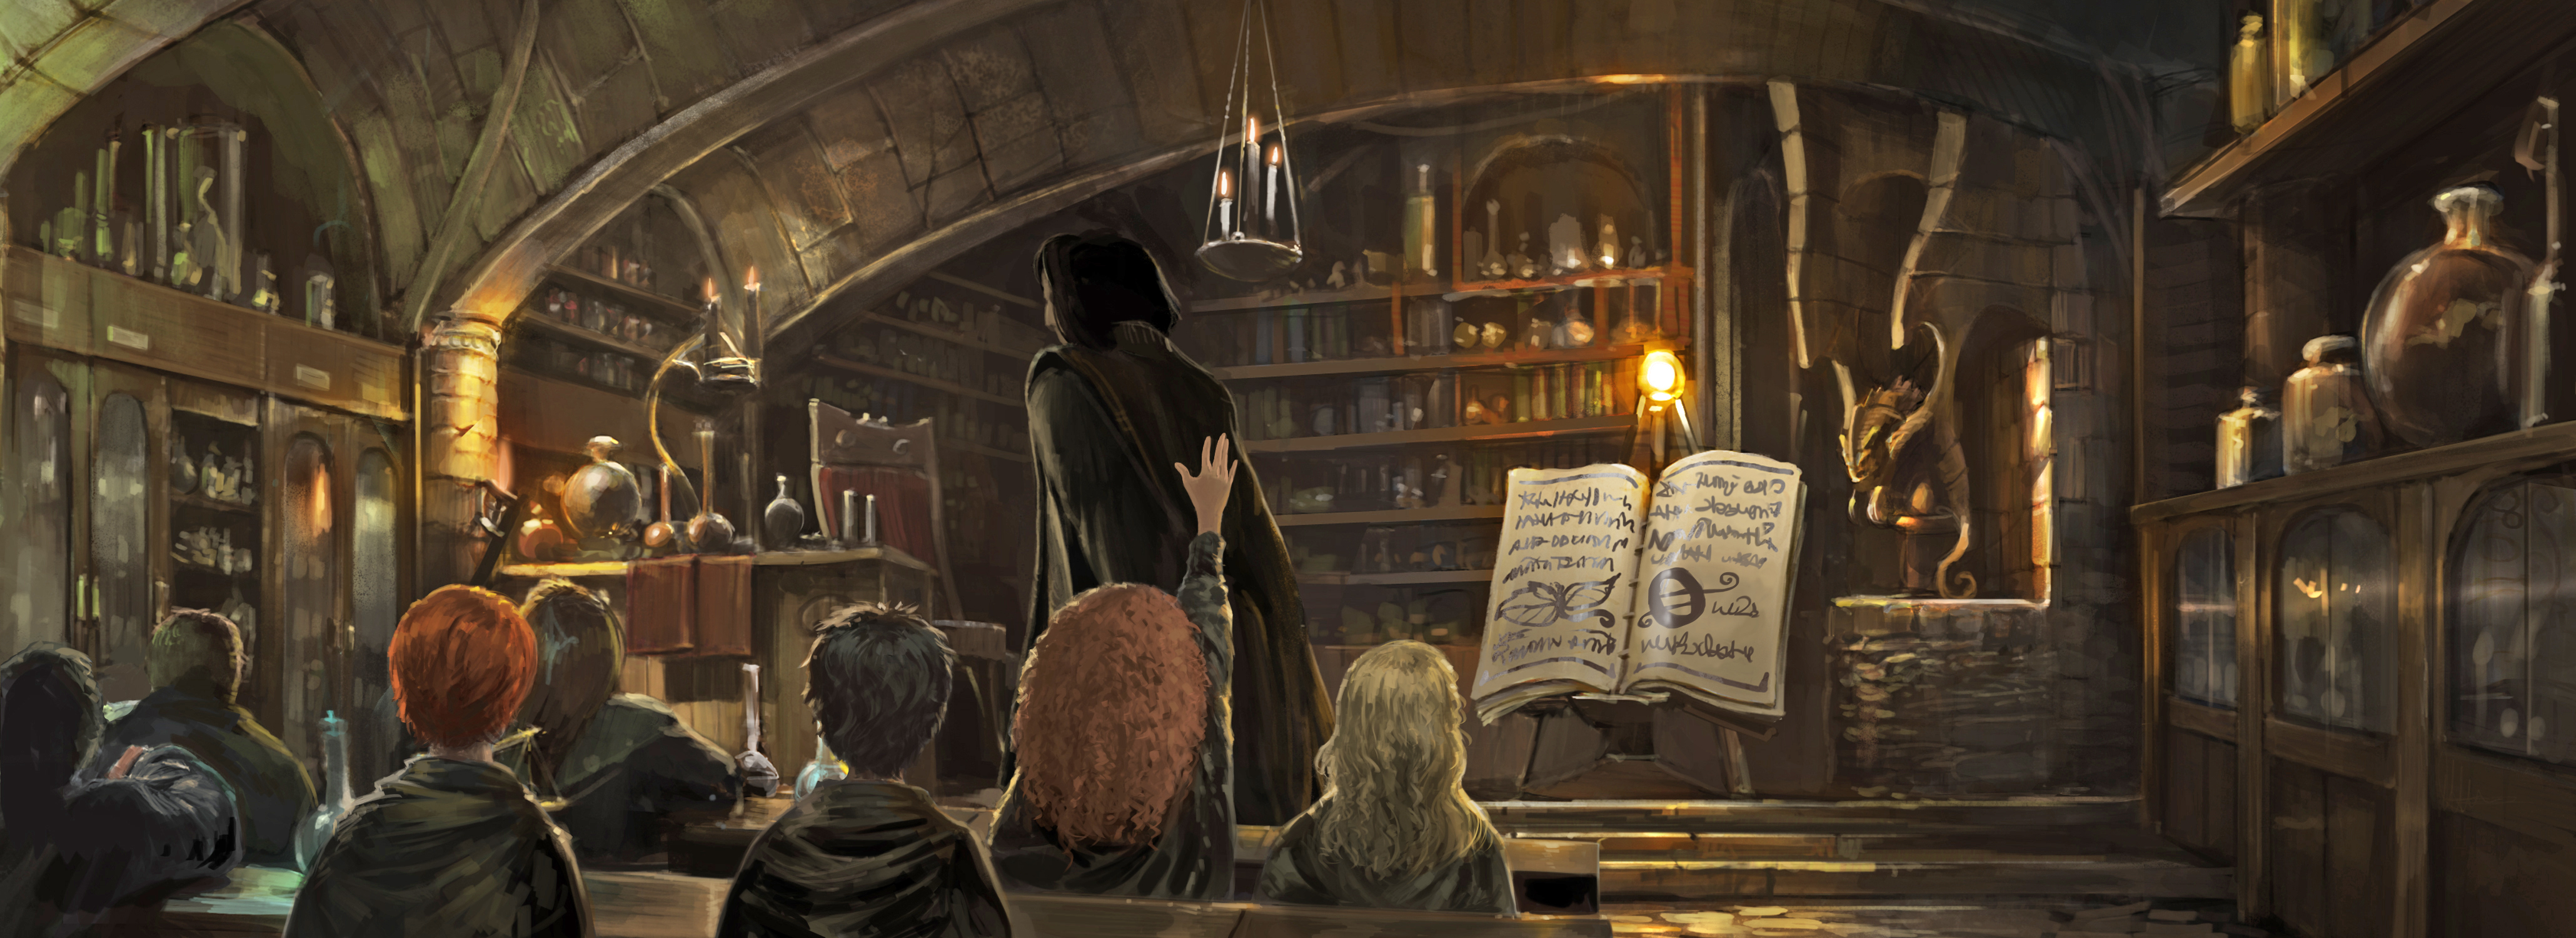 Snape teaching potions from the Philosopher's Stone 